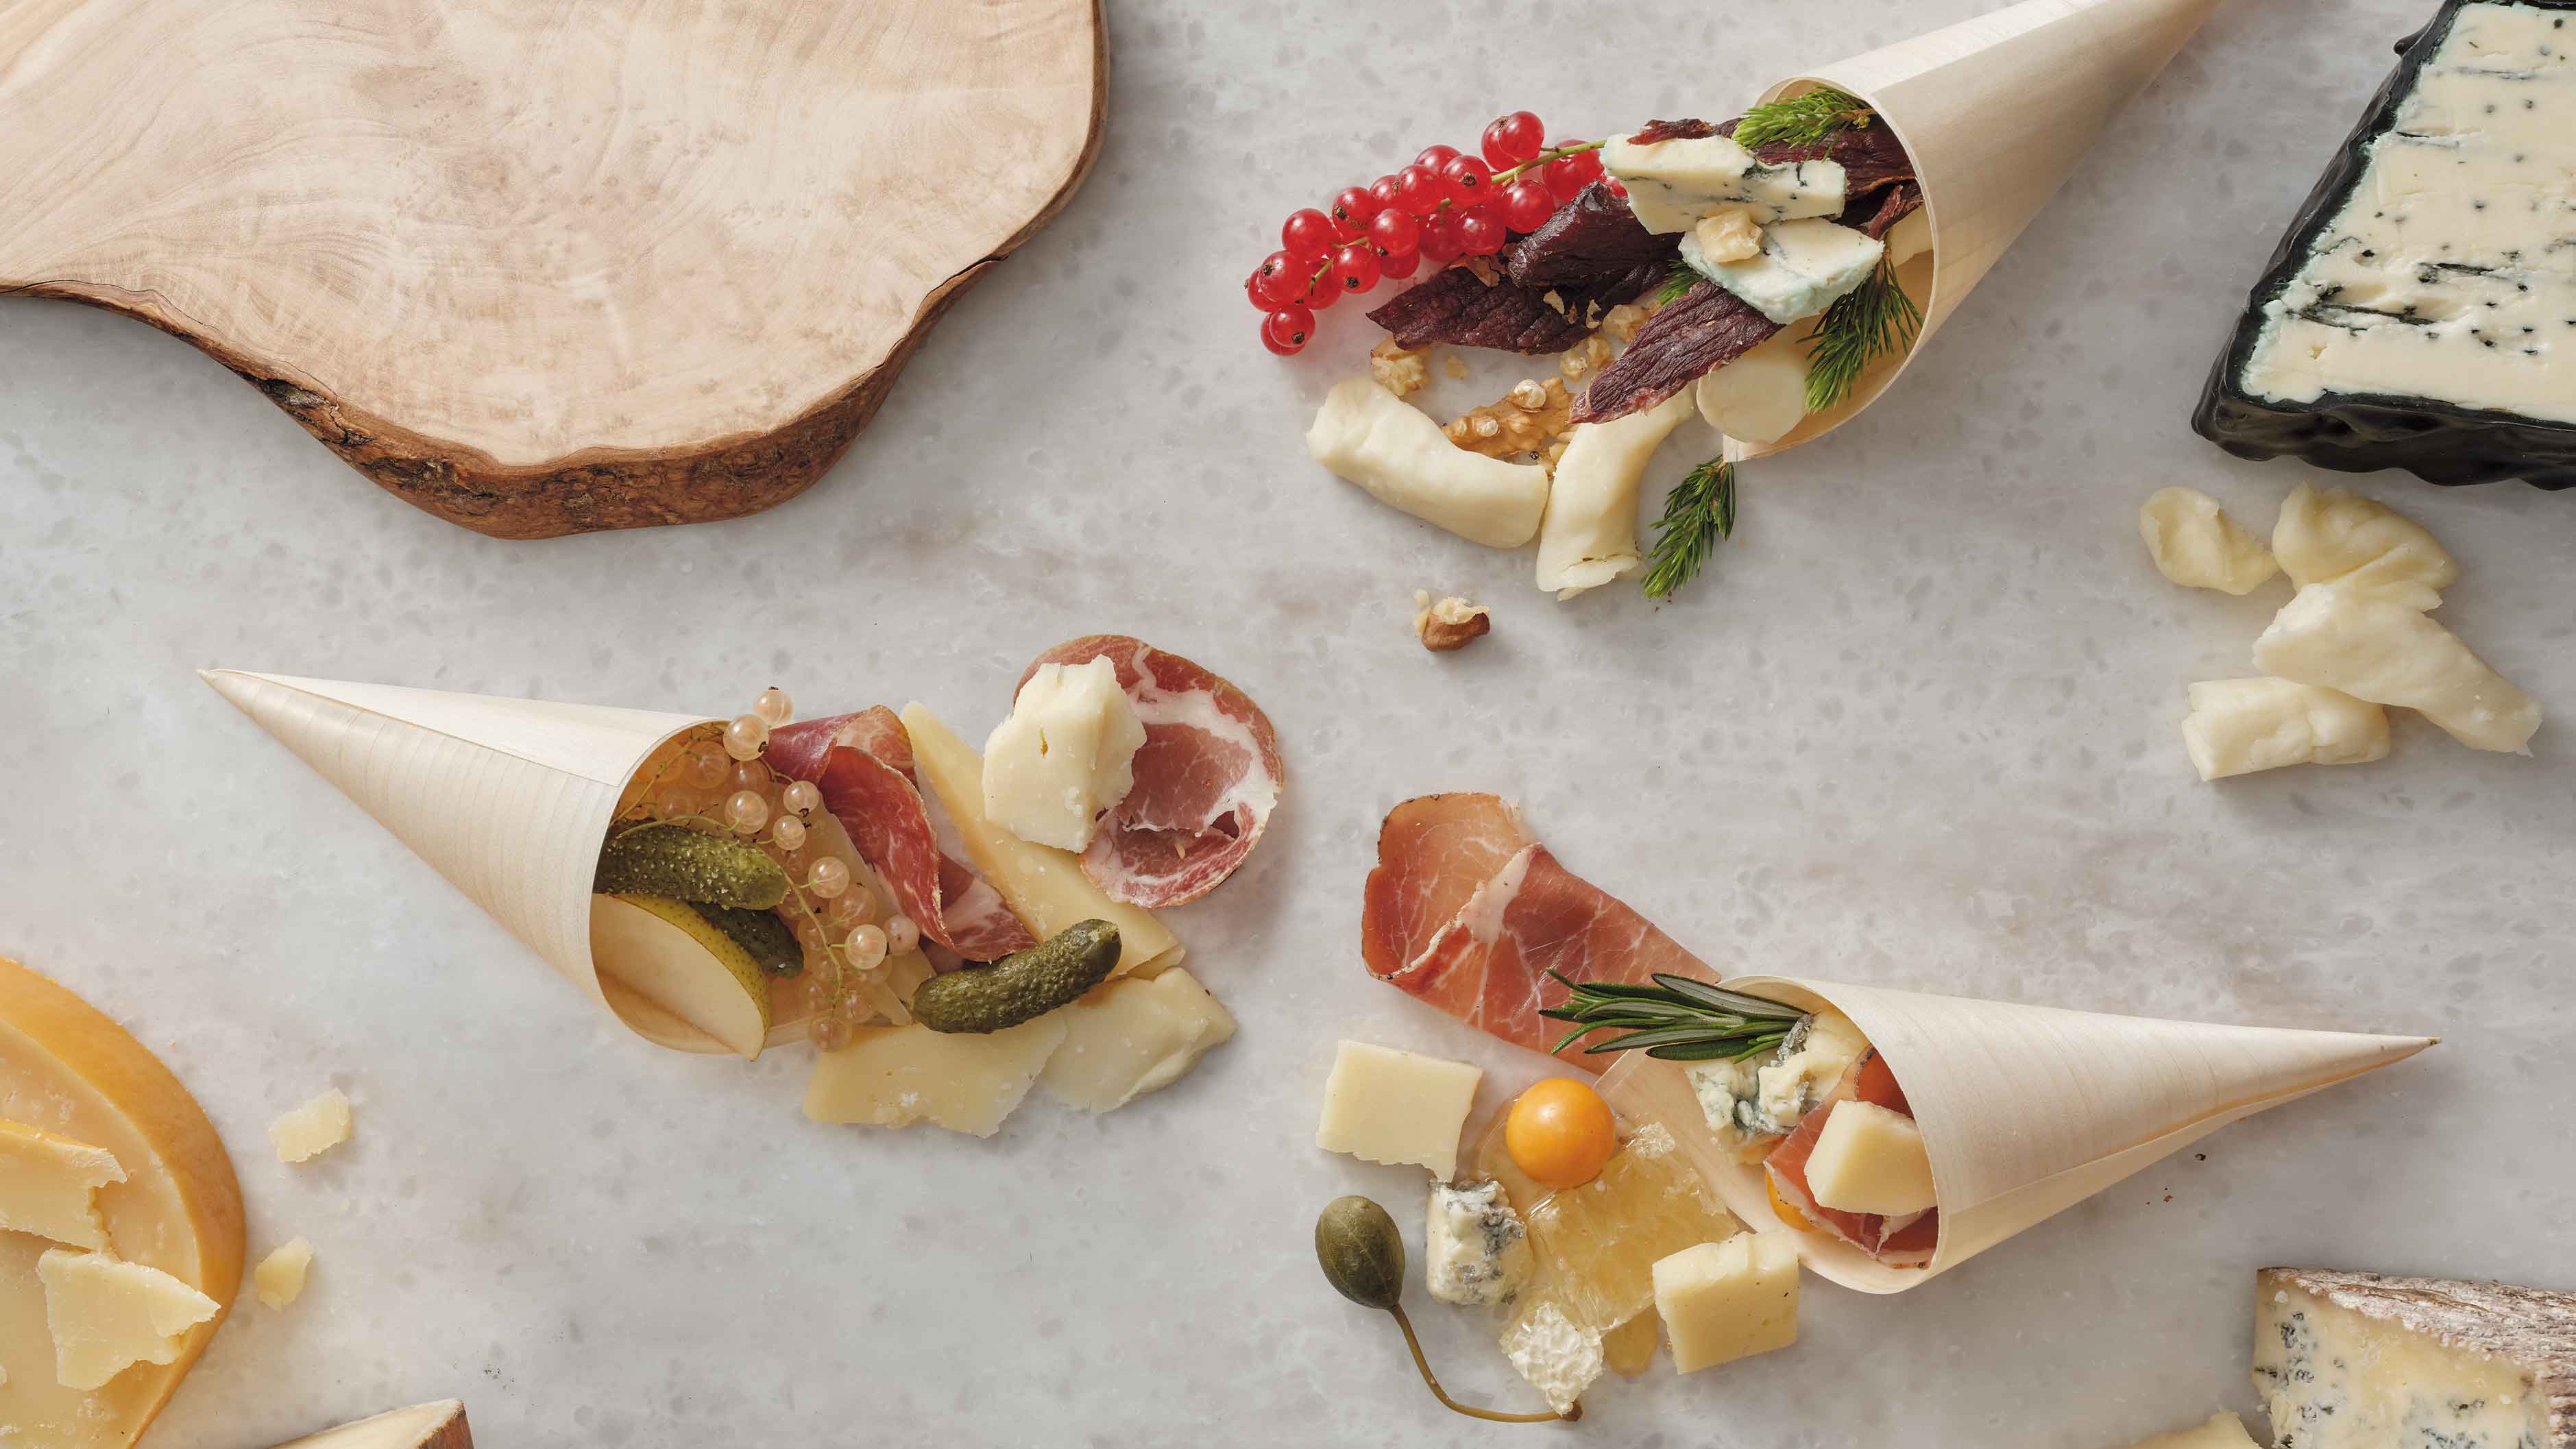 Overhead view of three bamboo cones filled with artisanal cheeses, gherkin pickles, currants, honeycomb, and cured meats.